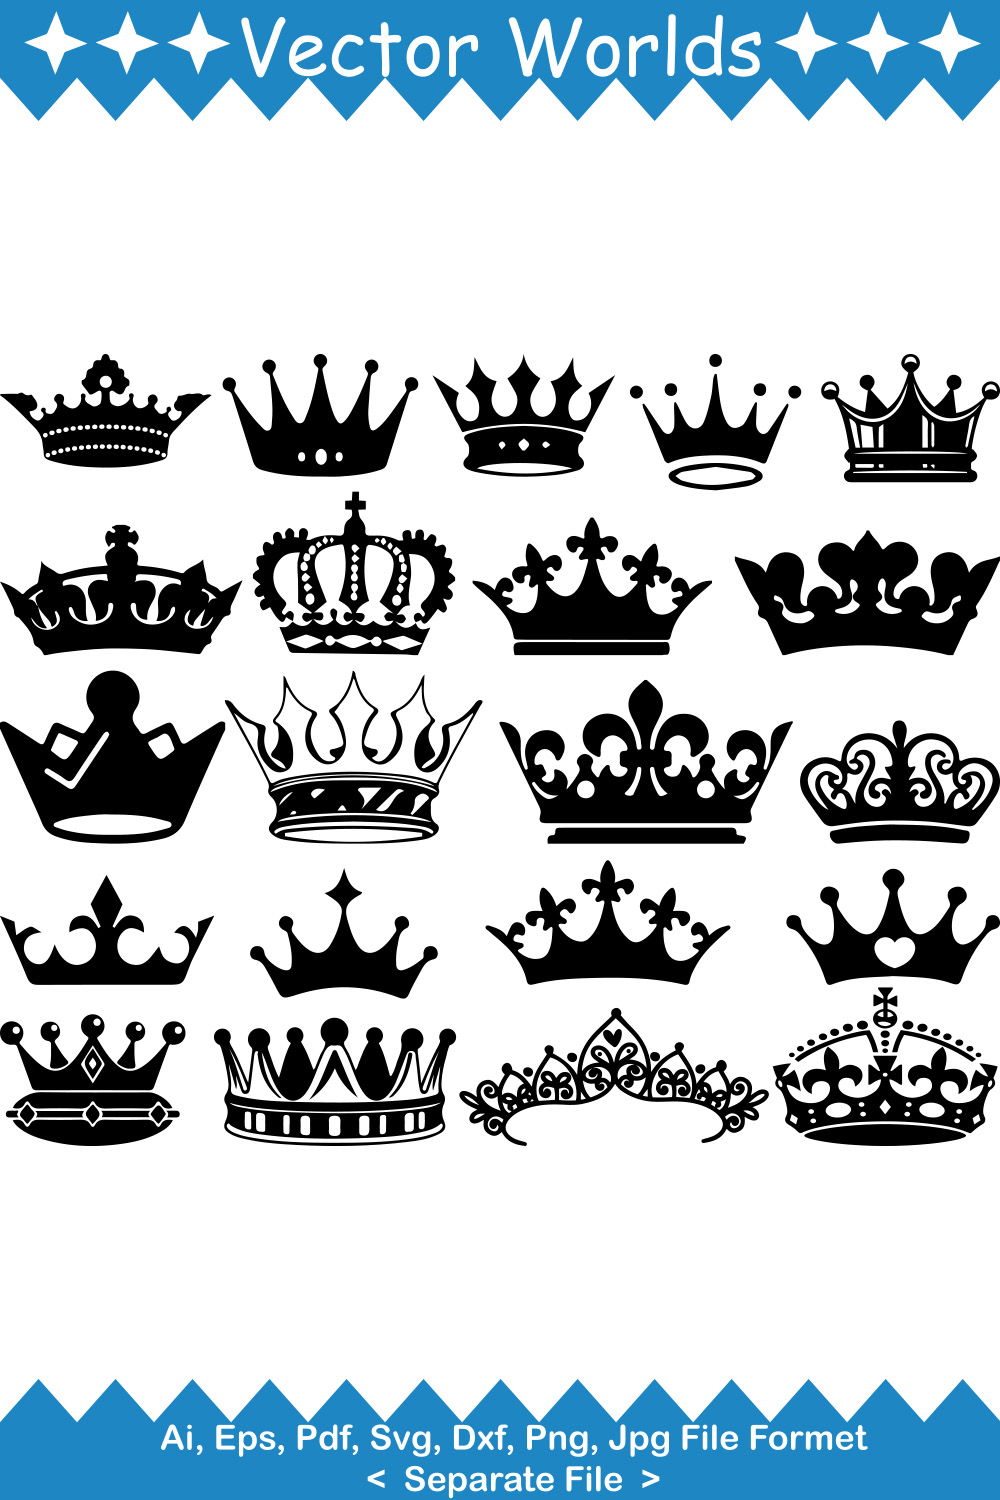 Set of unique images of silhouettes of crowns